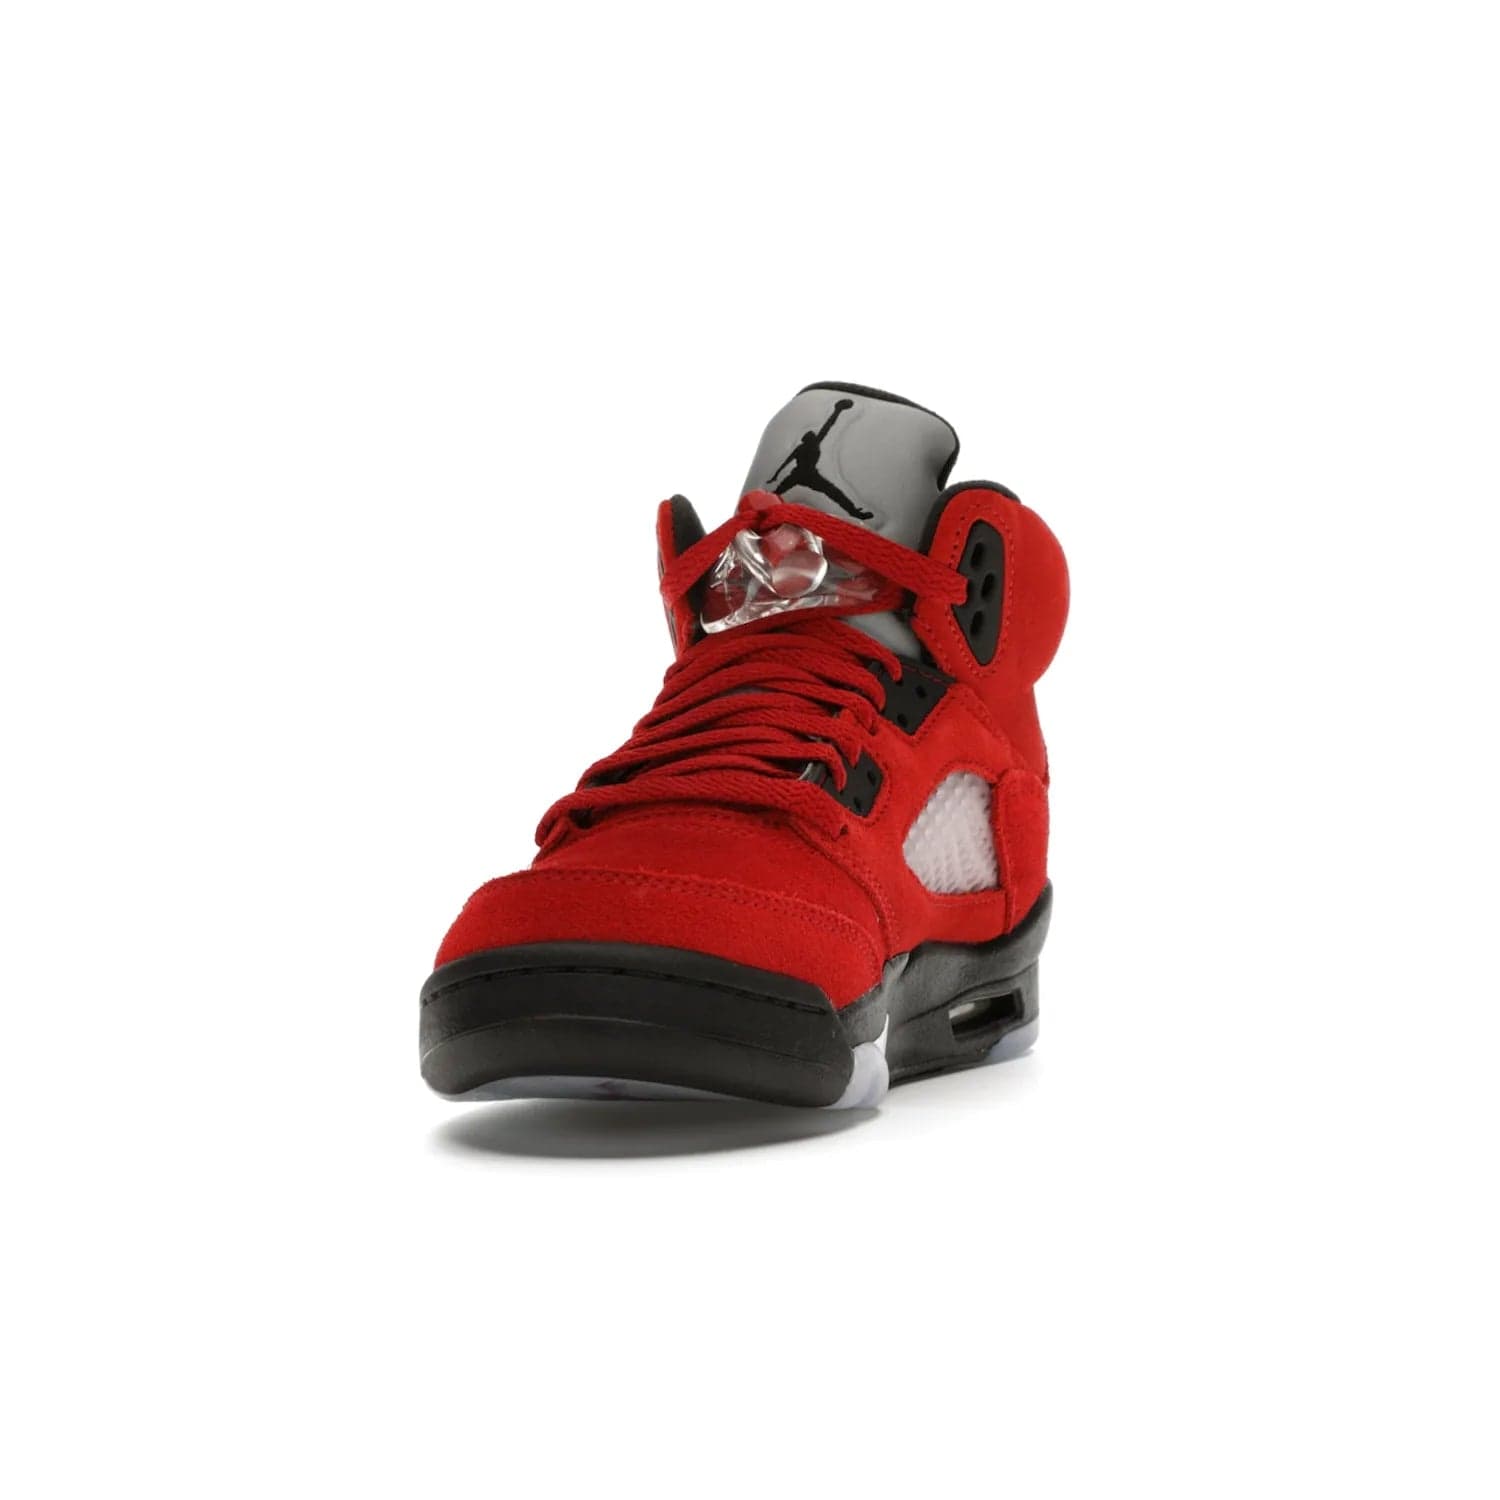 Jordan 5 Retro Raging Bull Red (2021) (GS) - Image 12 - Only at www.BallersClubKickz.com - Jordan 5 Retro Raging Bulls Red 2021 GS. Varsity Red suede upper with embroidered number 23, black leather detail, red laces, and midsole with air cushioning. Jumpman logos on tongue, heel, and outsole. On-trend streetwear and basketball style. Released April 10, 2021.